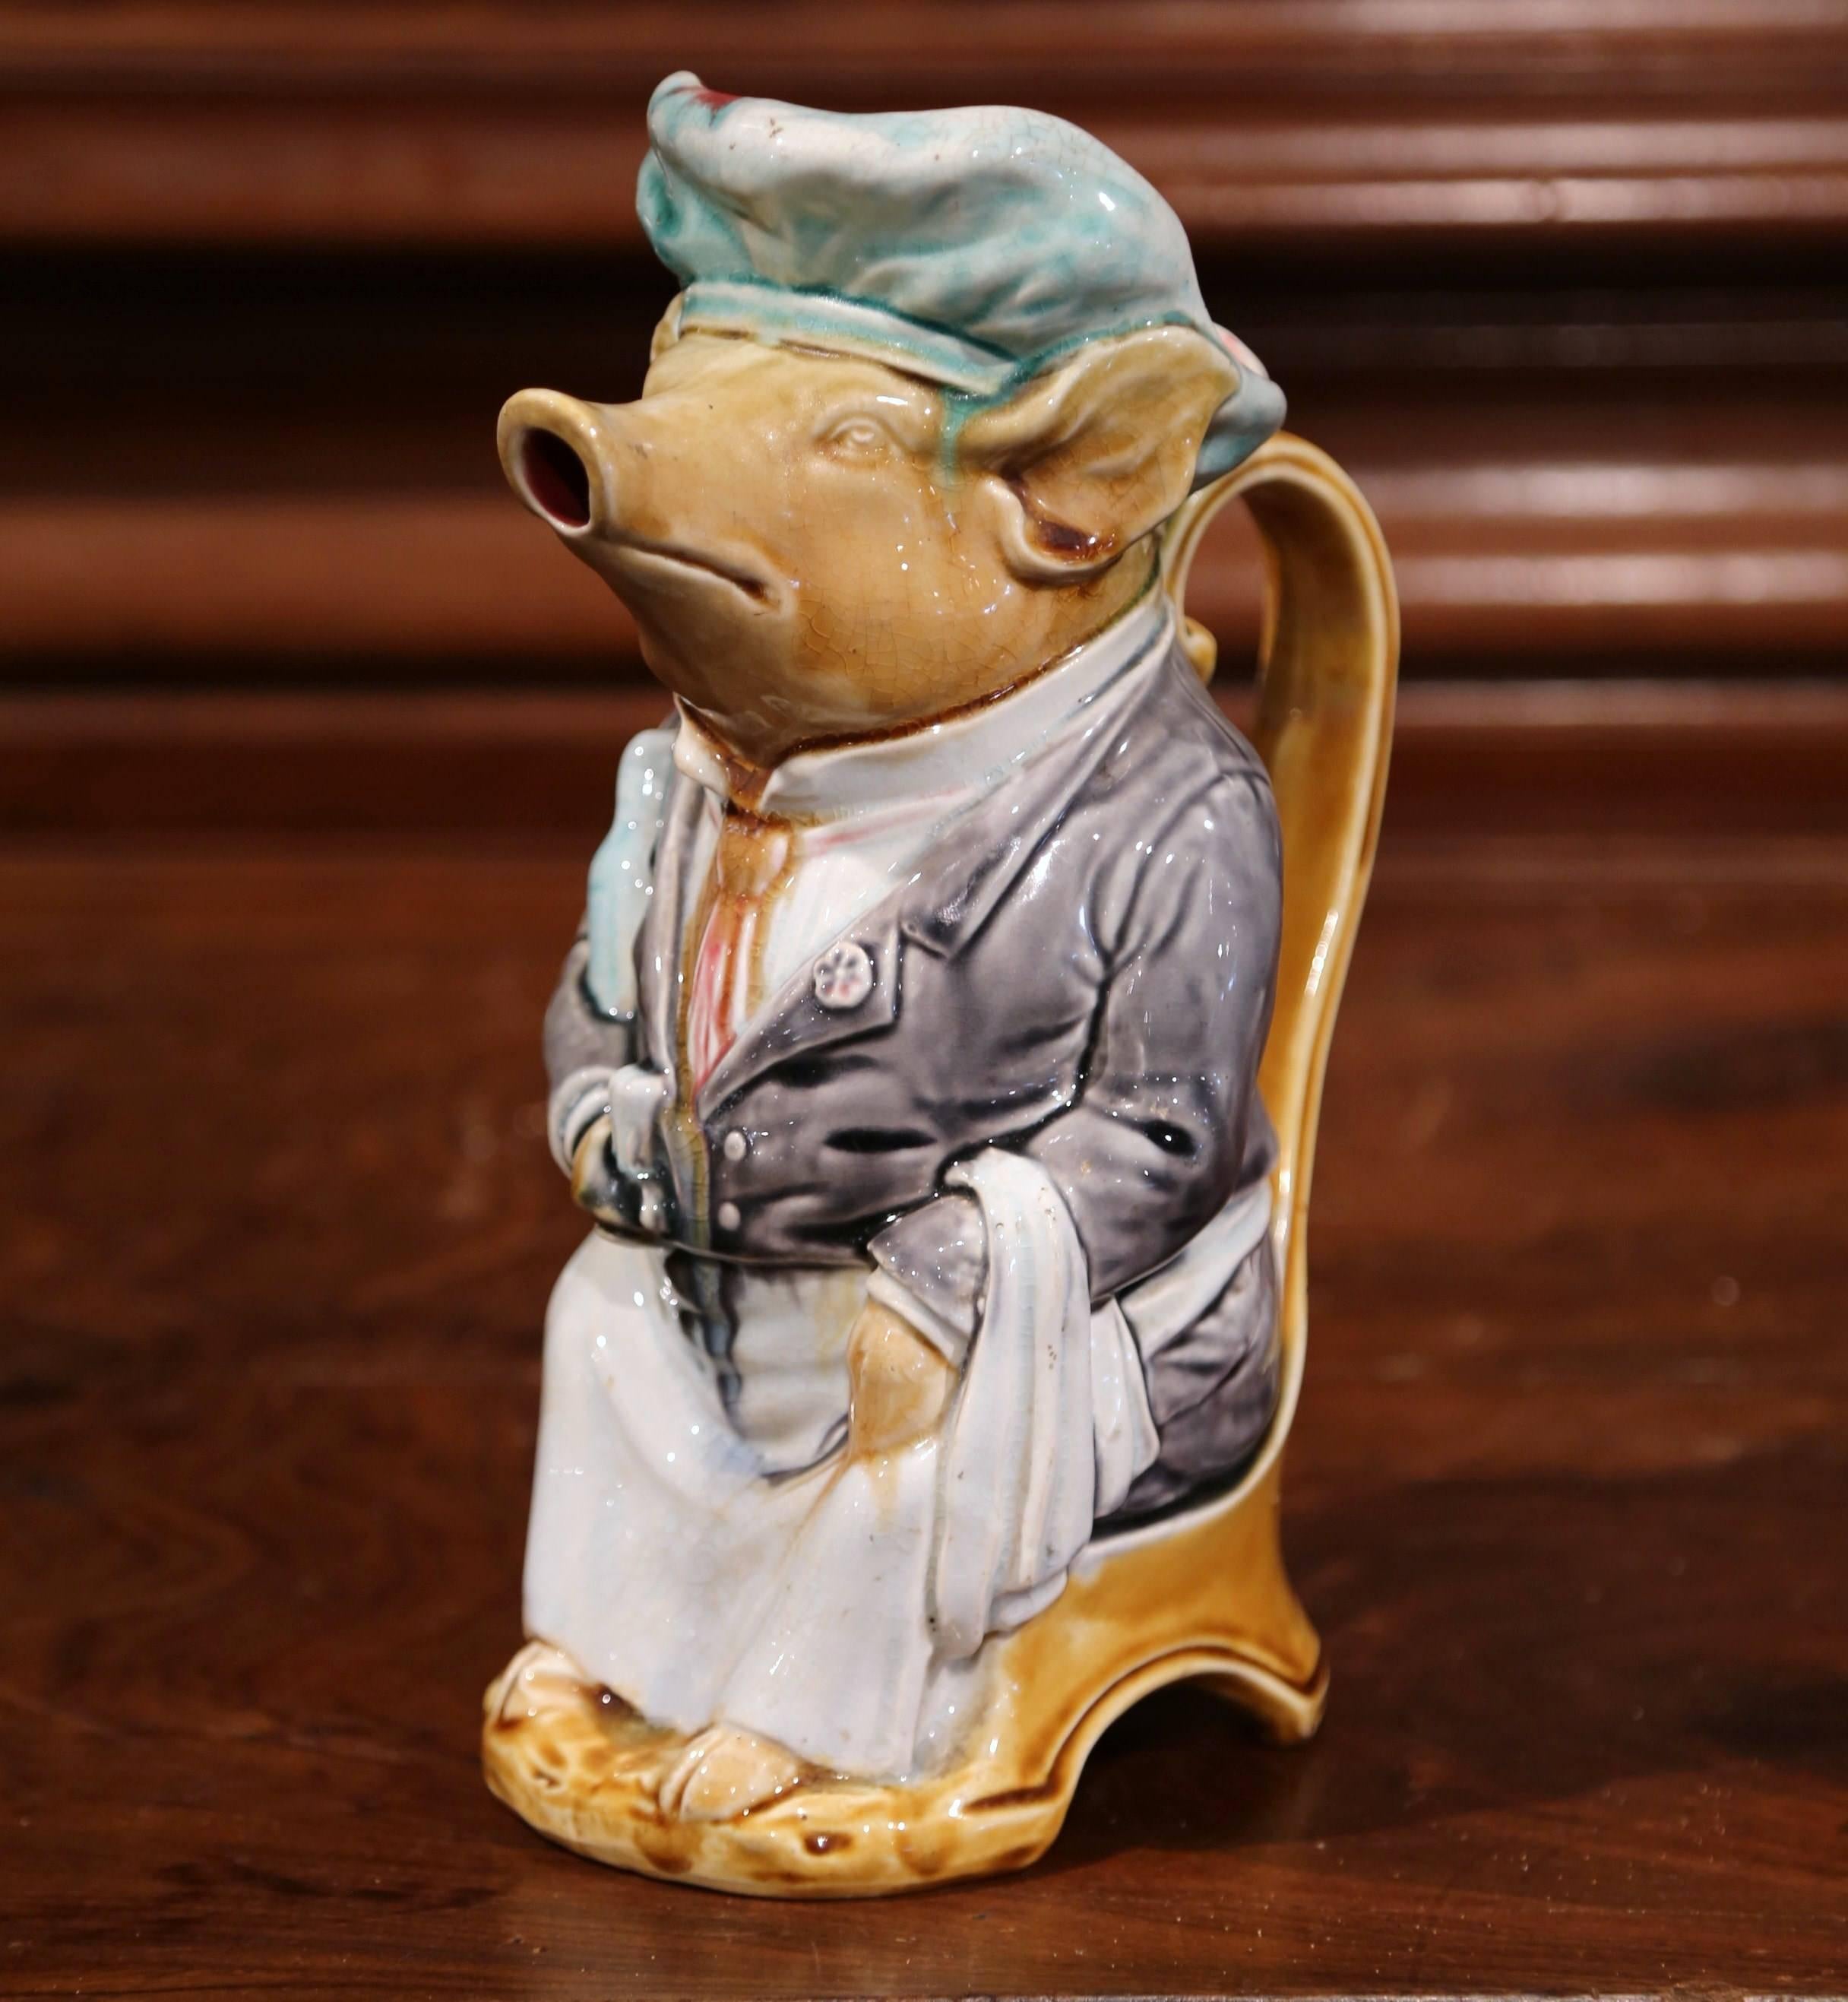 Hand-Crafted 19th Century French Hand-Painted Ceramic Barbotine Pig Pitcher by Onnaing